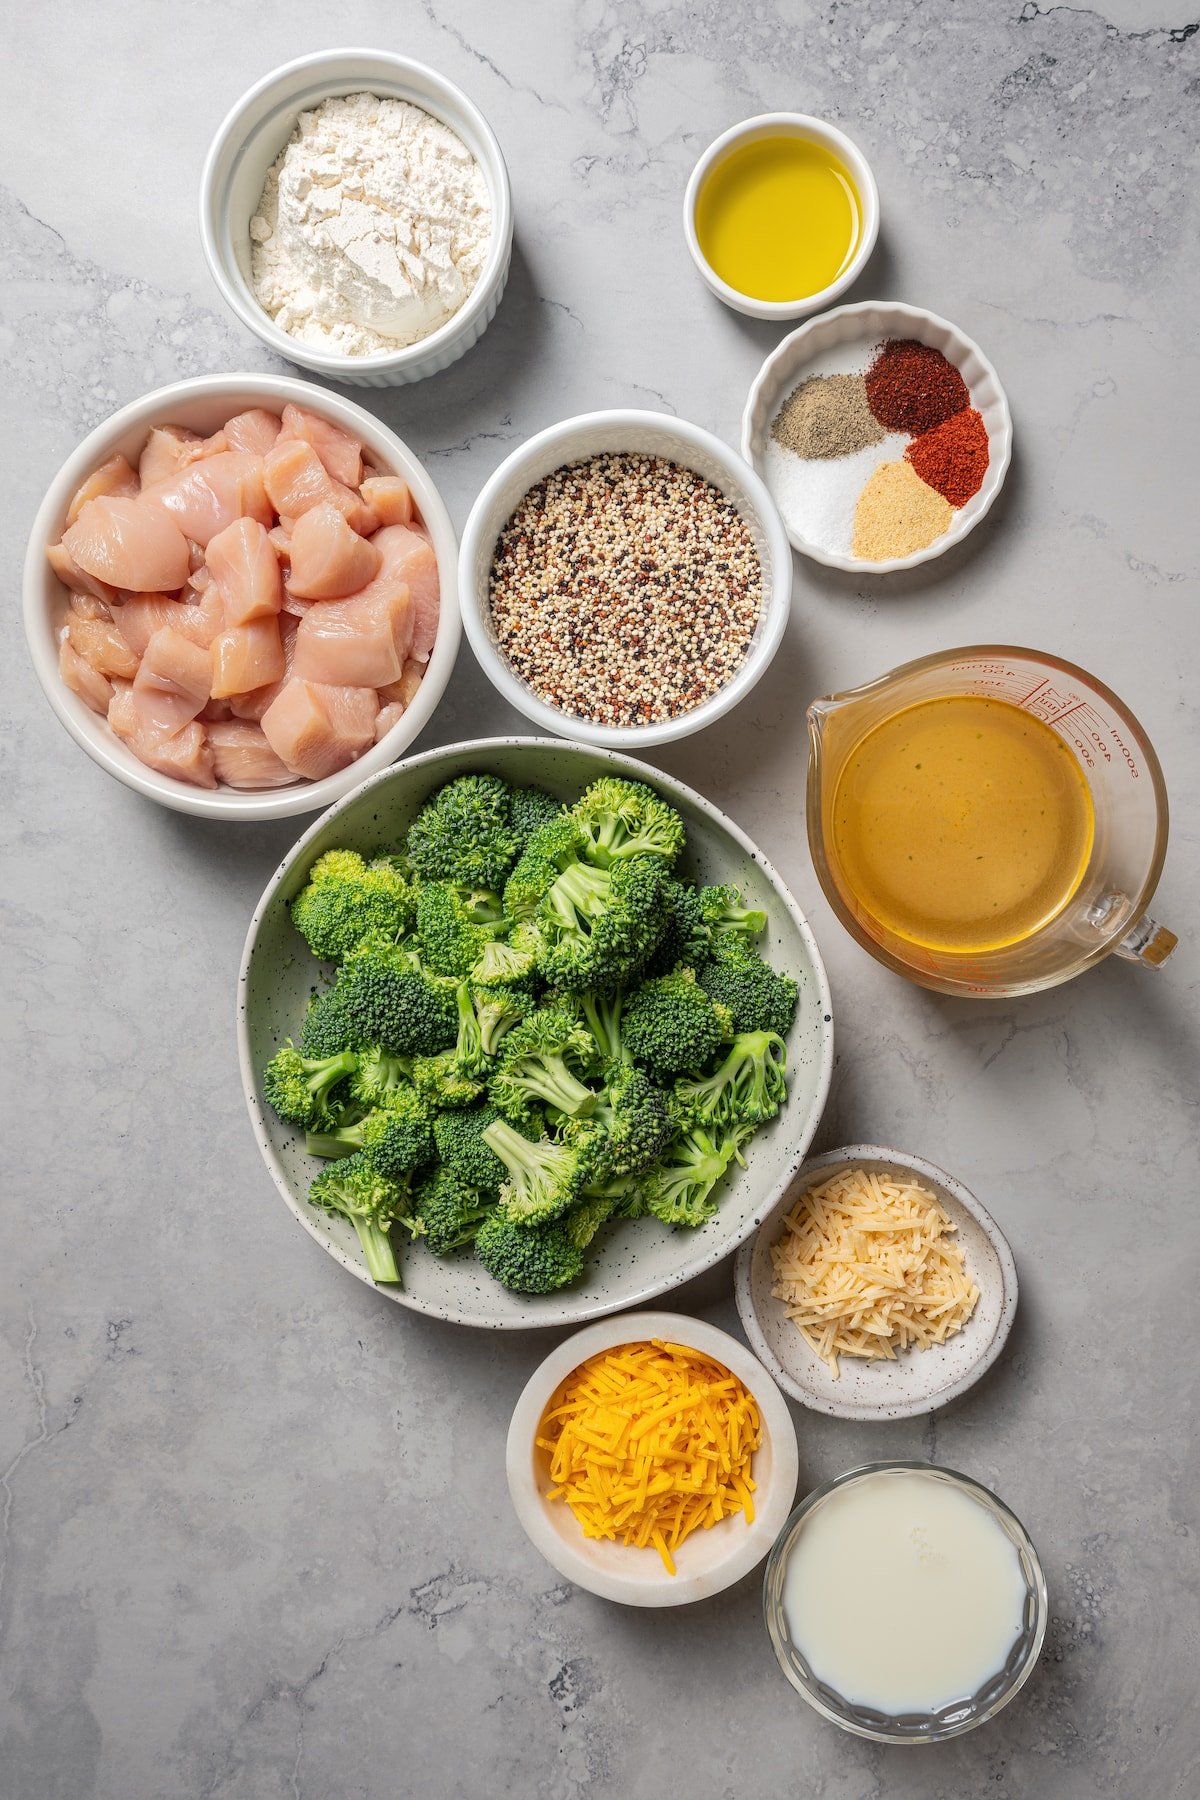 Ingredients for chicken and broccoli casserole separated into bowls.